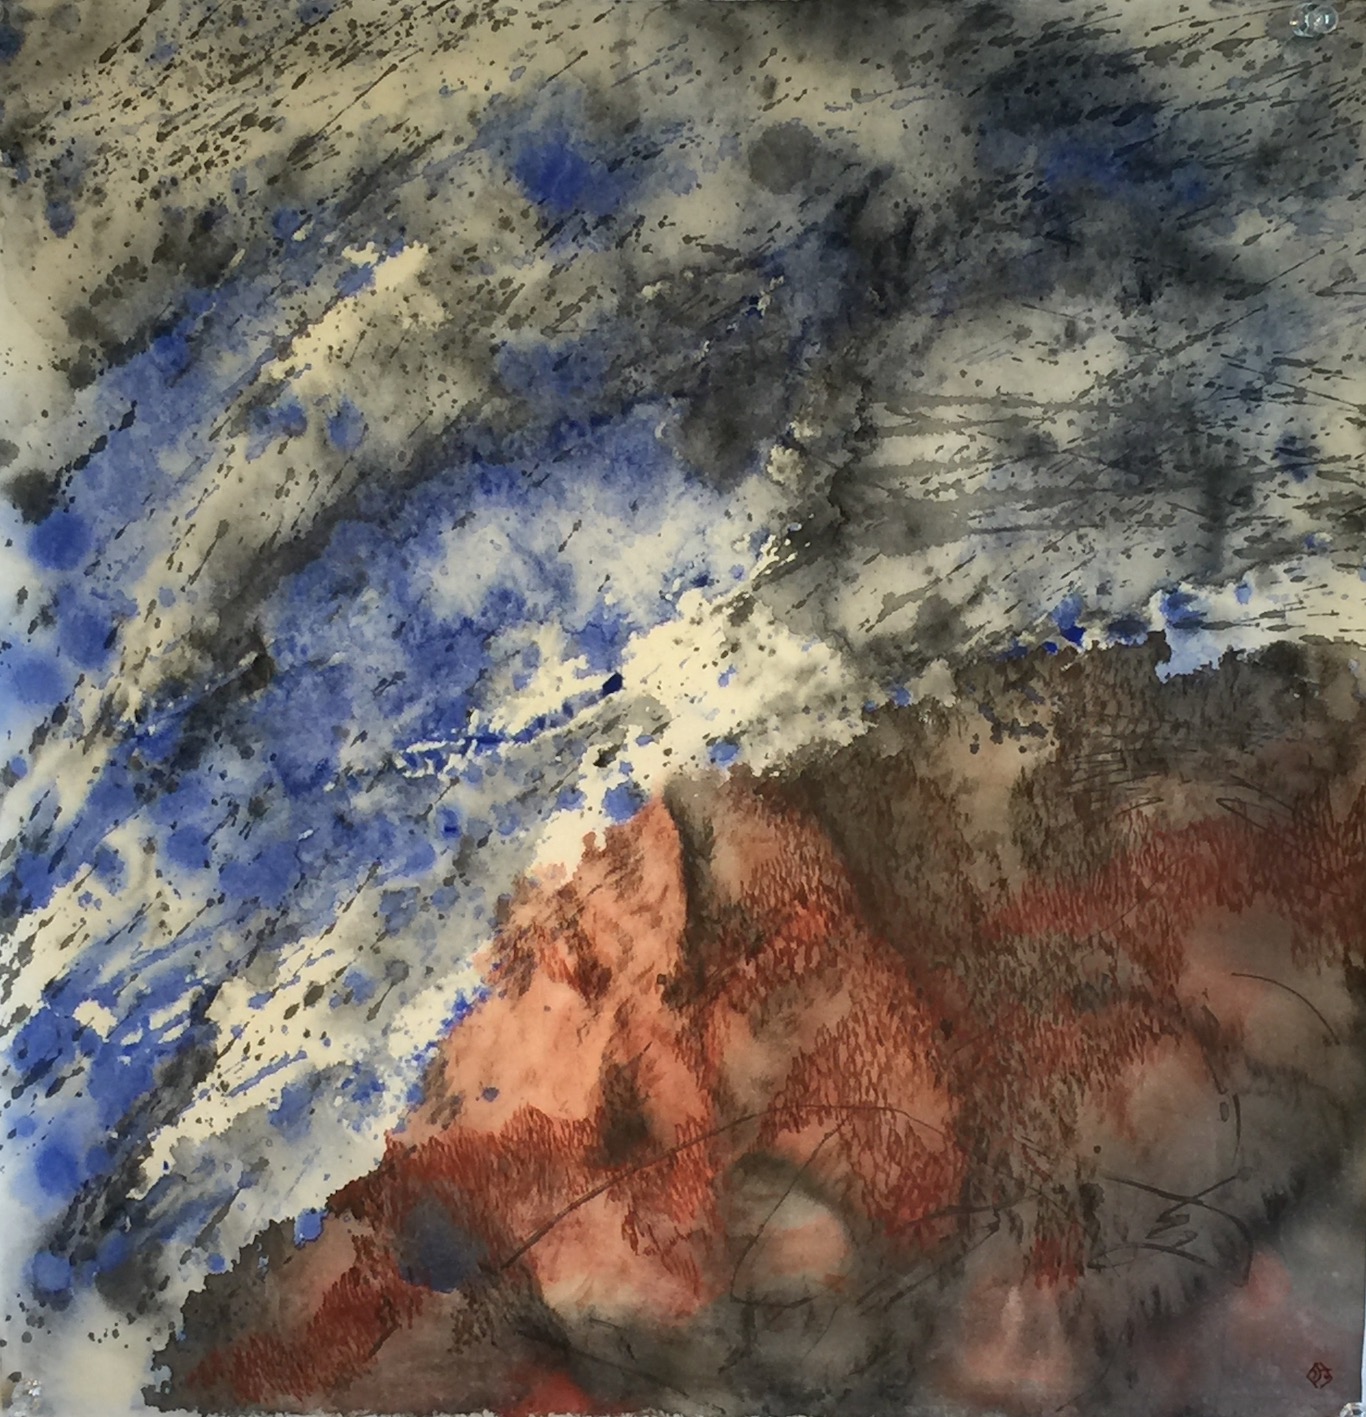 Red Rock in the Blue Air 1 49 X 48 cms sumi ink, acrylic, iron oxide 惑星の誕生 1 墨　アクリル　ベンガラ　　2020